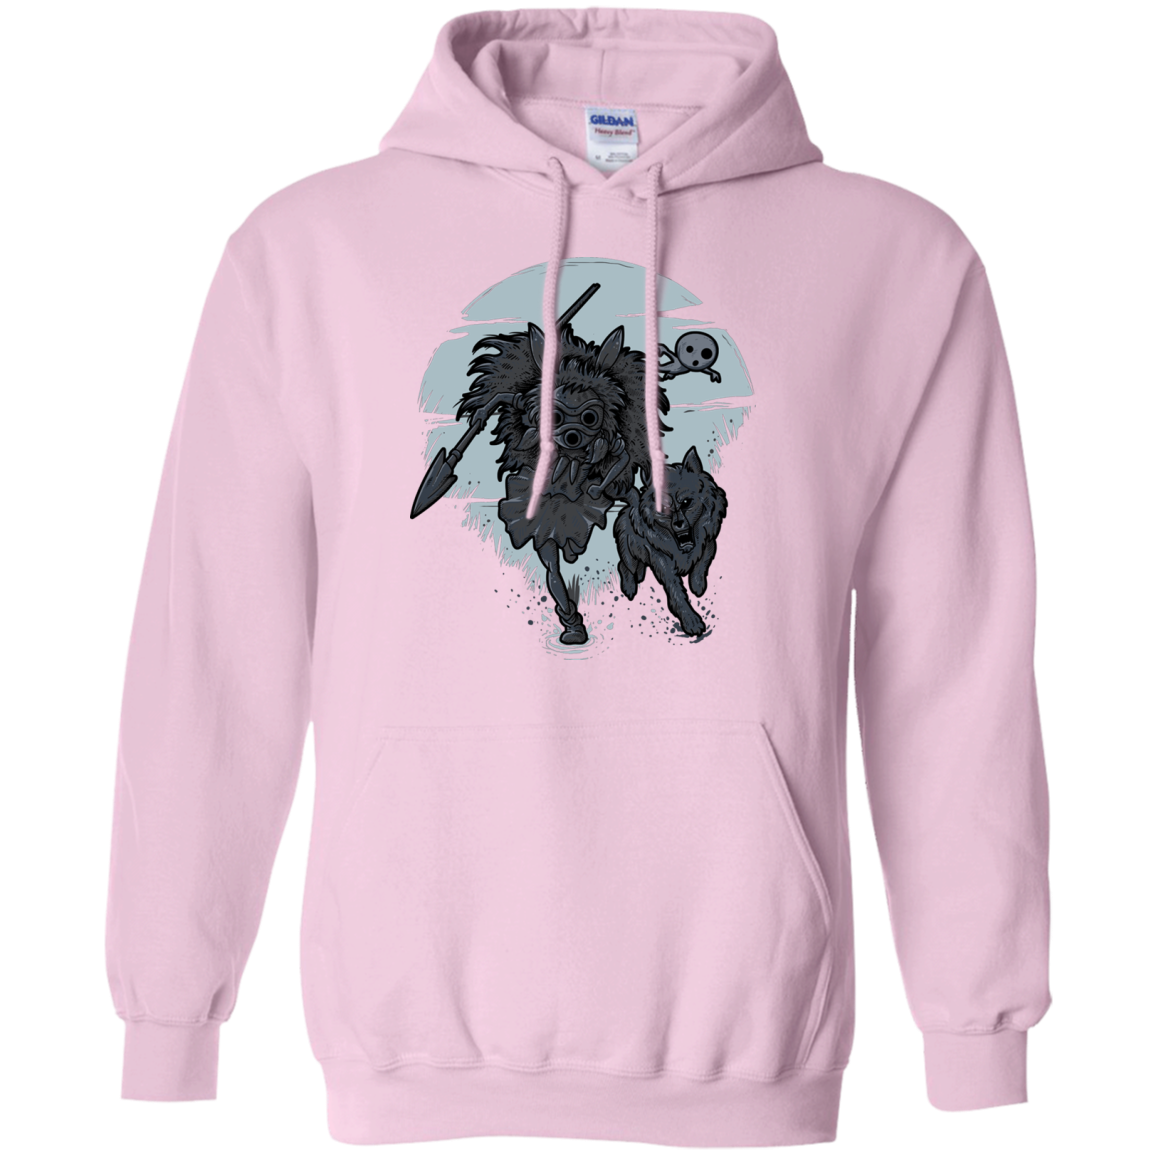 The Princess Pullover Hoodie